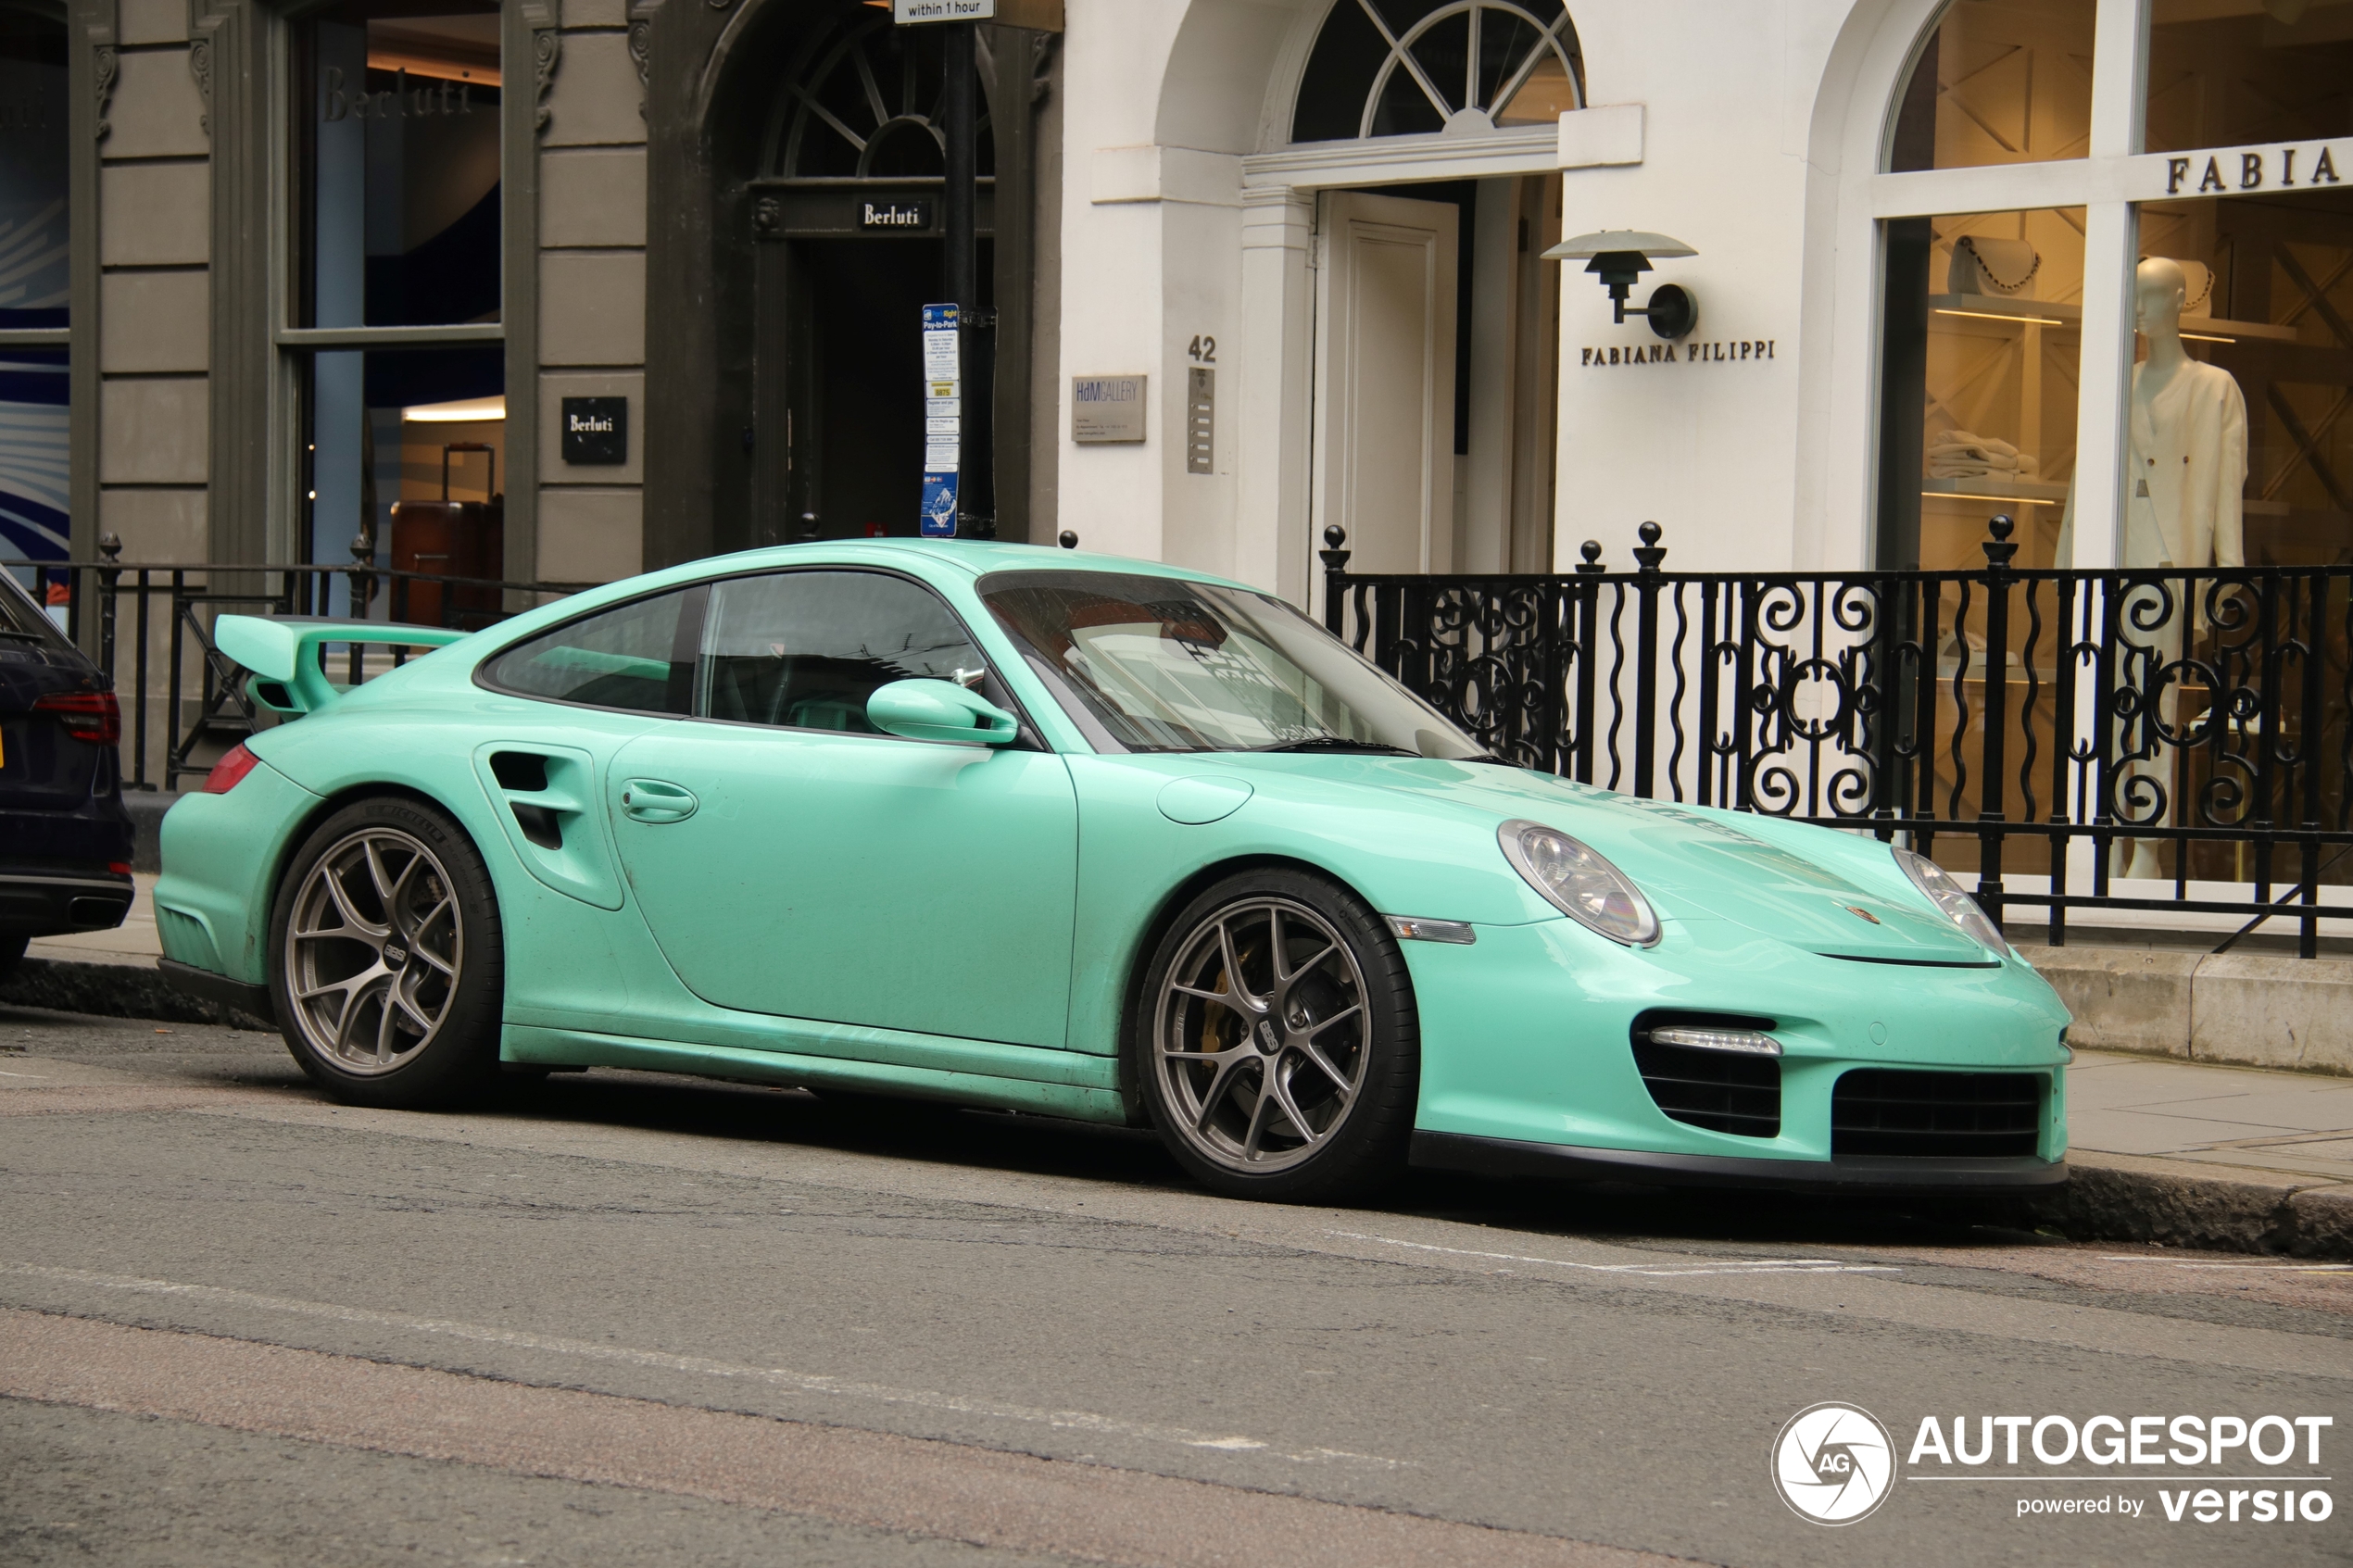 This GT2 is more exclusive than others...